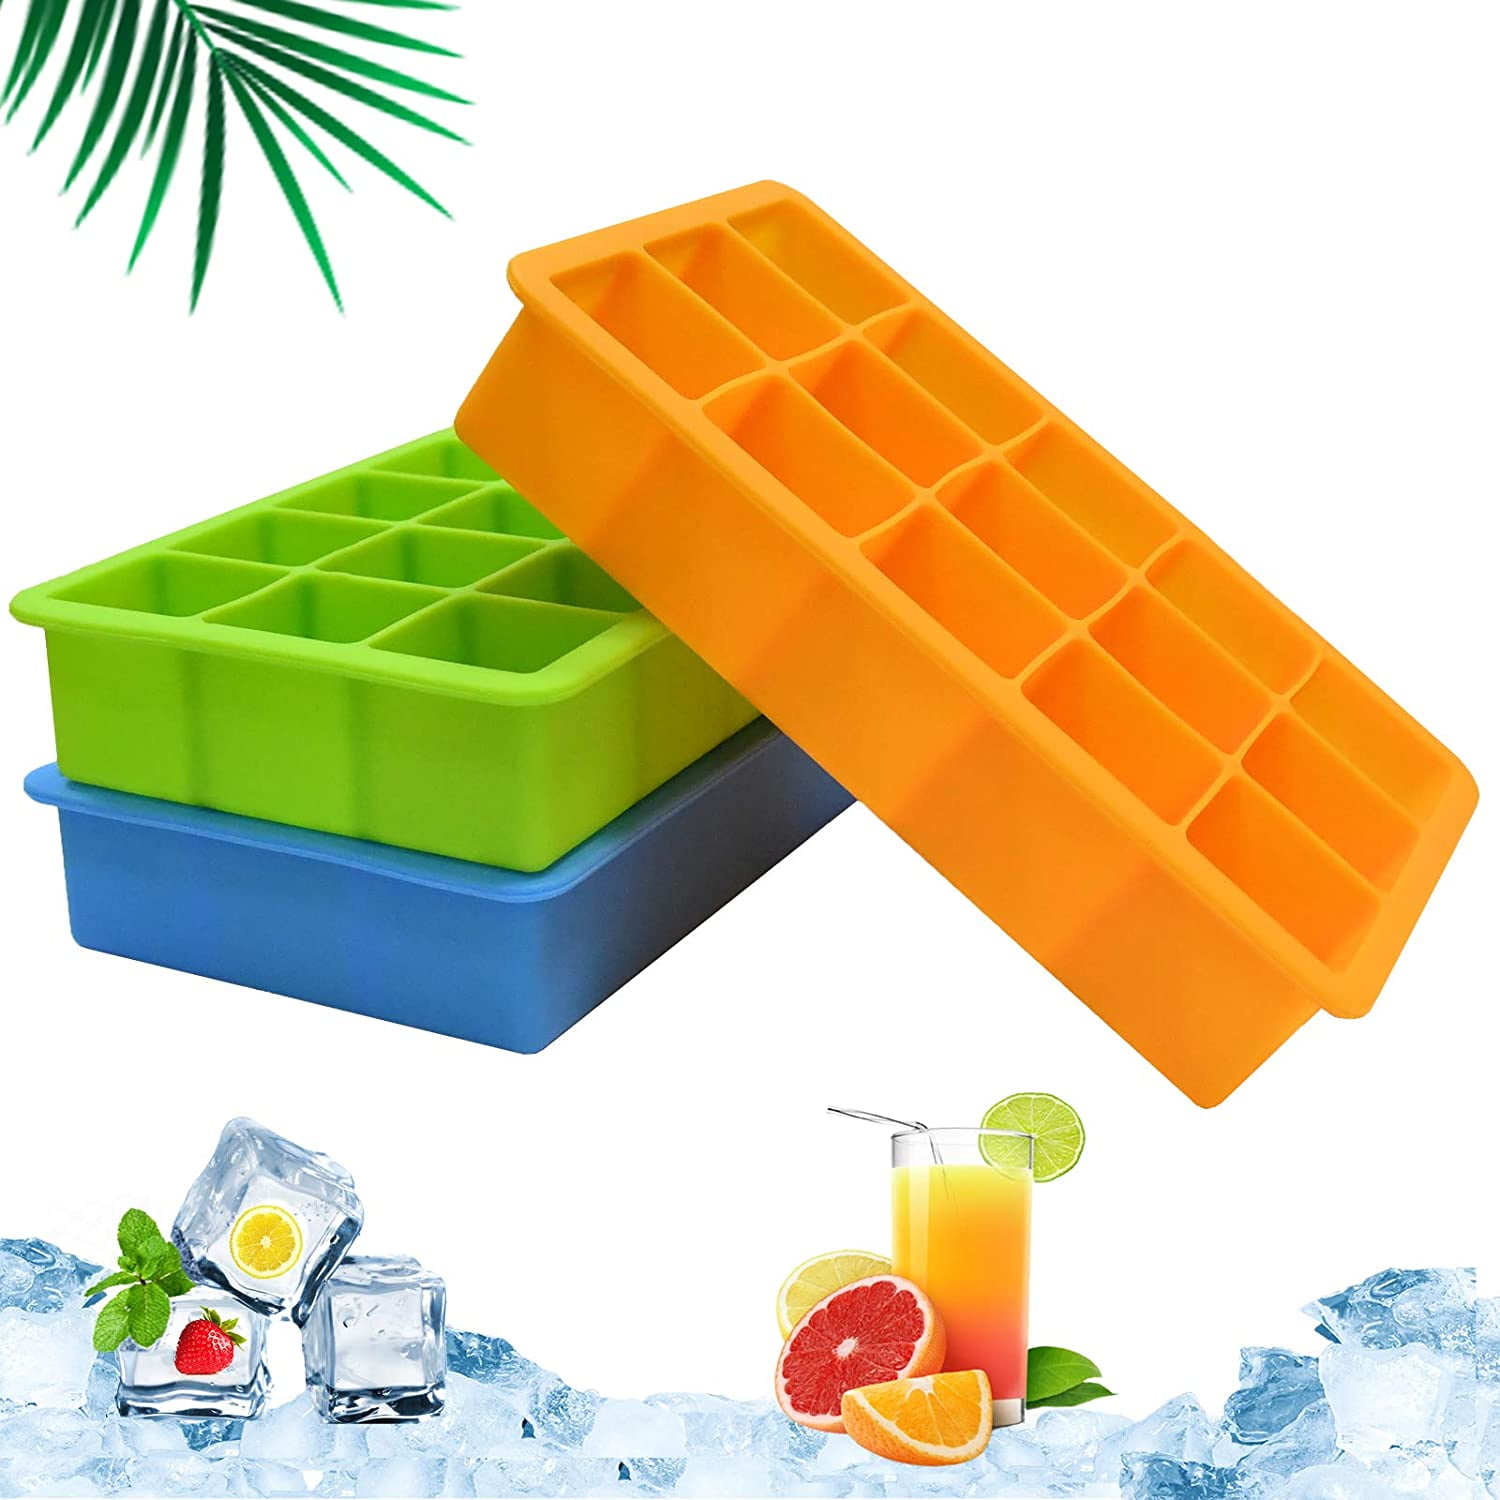 3 PACK Ice Cube Trays with Lids Easy-release Silicone Square Mold with Cover for 